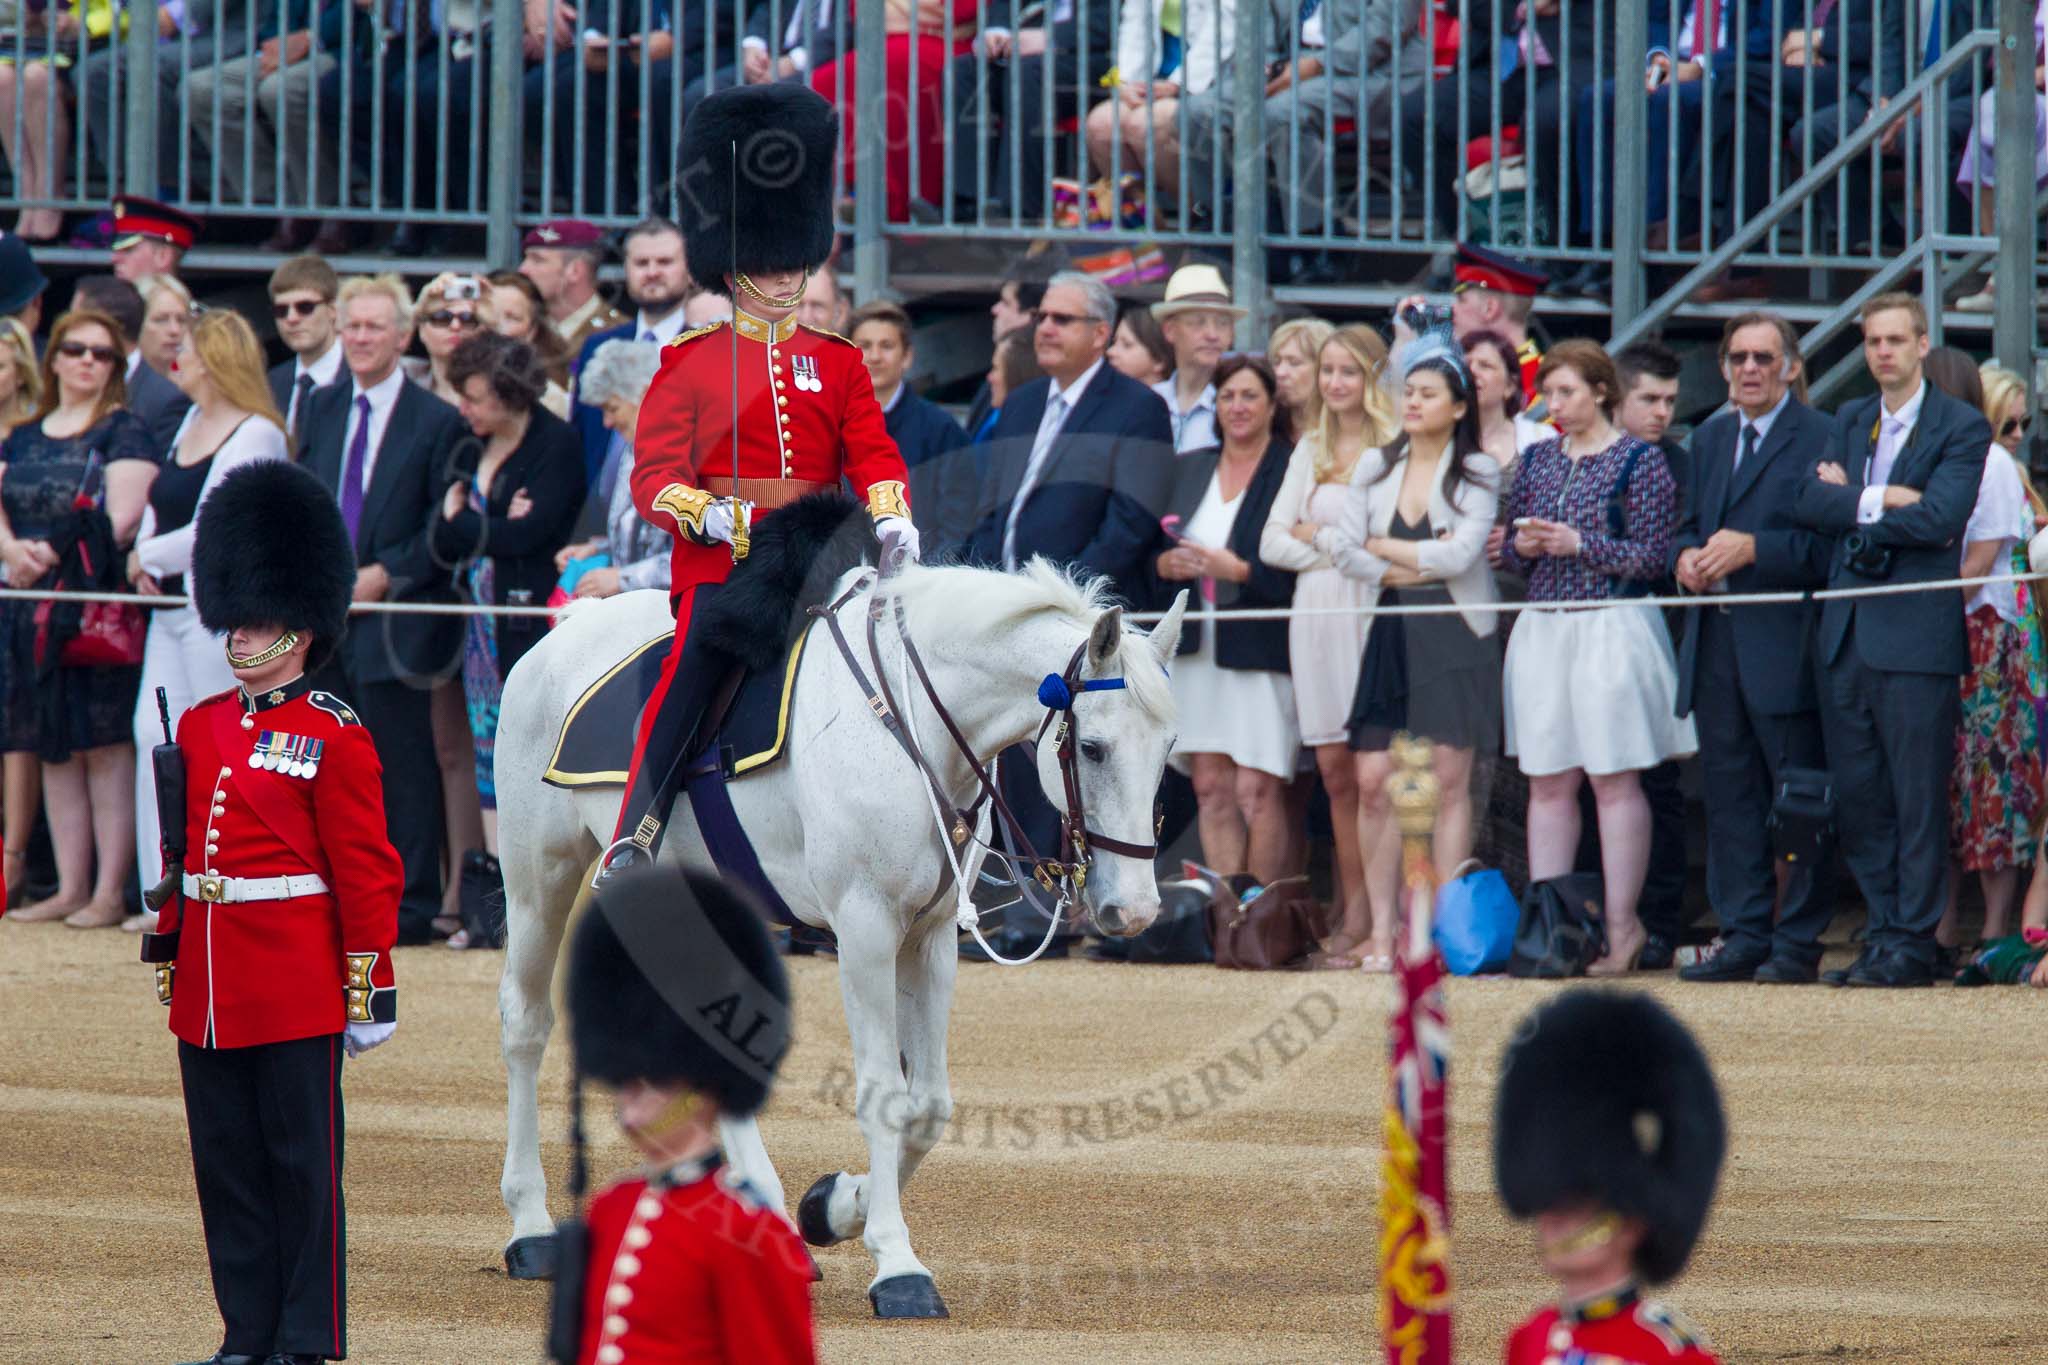 Trooping the Colour 2014.
Horse Guards Parade, Westminster,
London SW1A,

United Kingdom,
on 14 June 2014 at 10:42, image #234